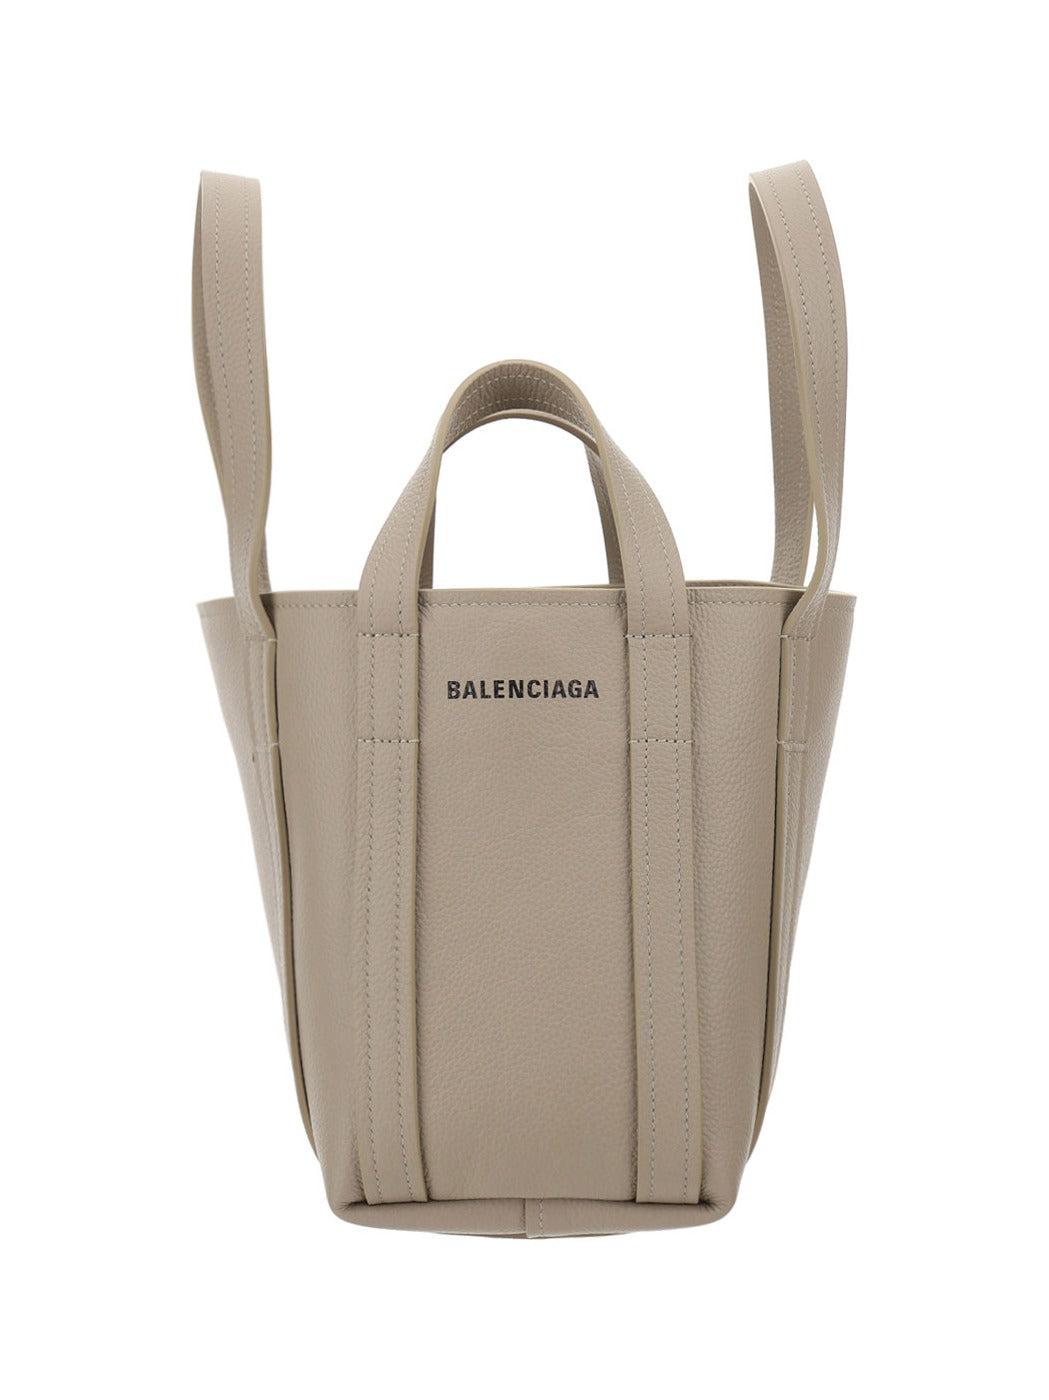 Balenciaga Leather Everyday Xs North-south Tote Bag in Beige 